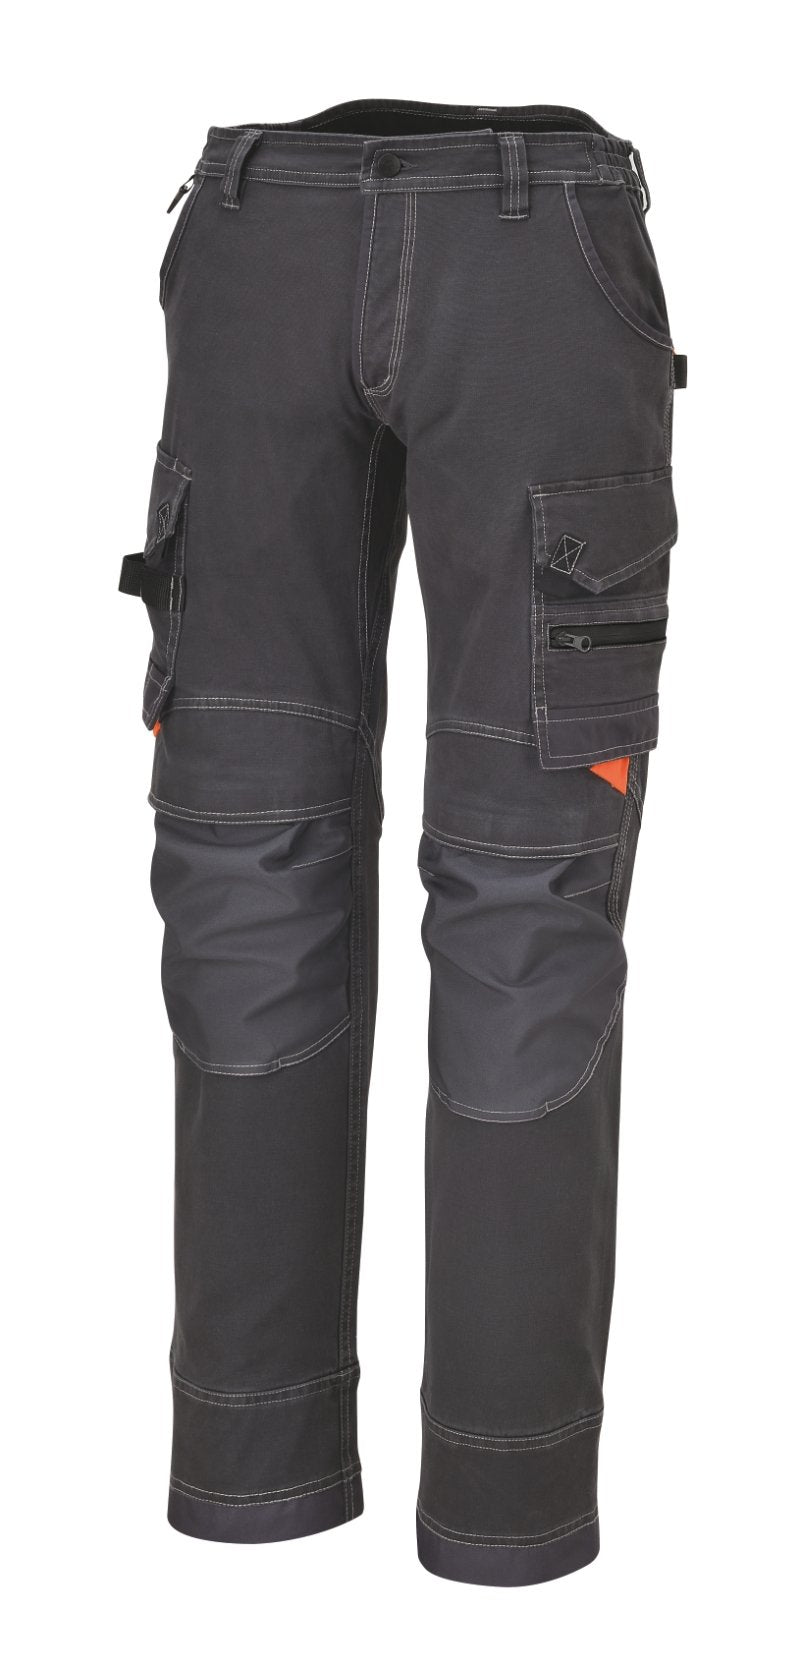 7816G - Work trousers, multipocket style